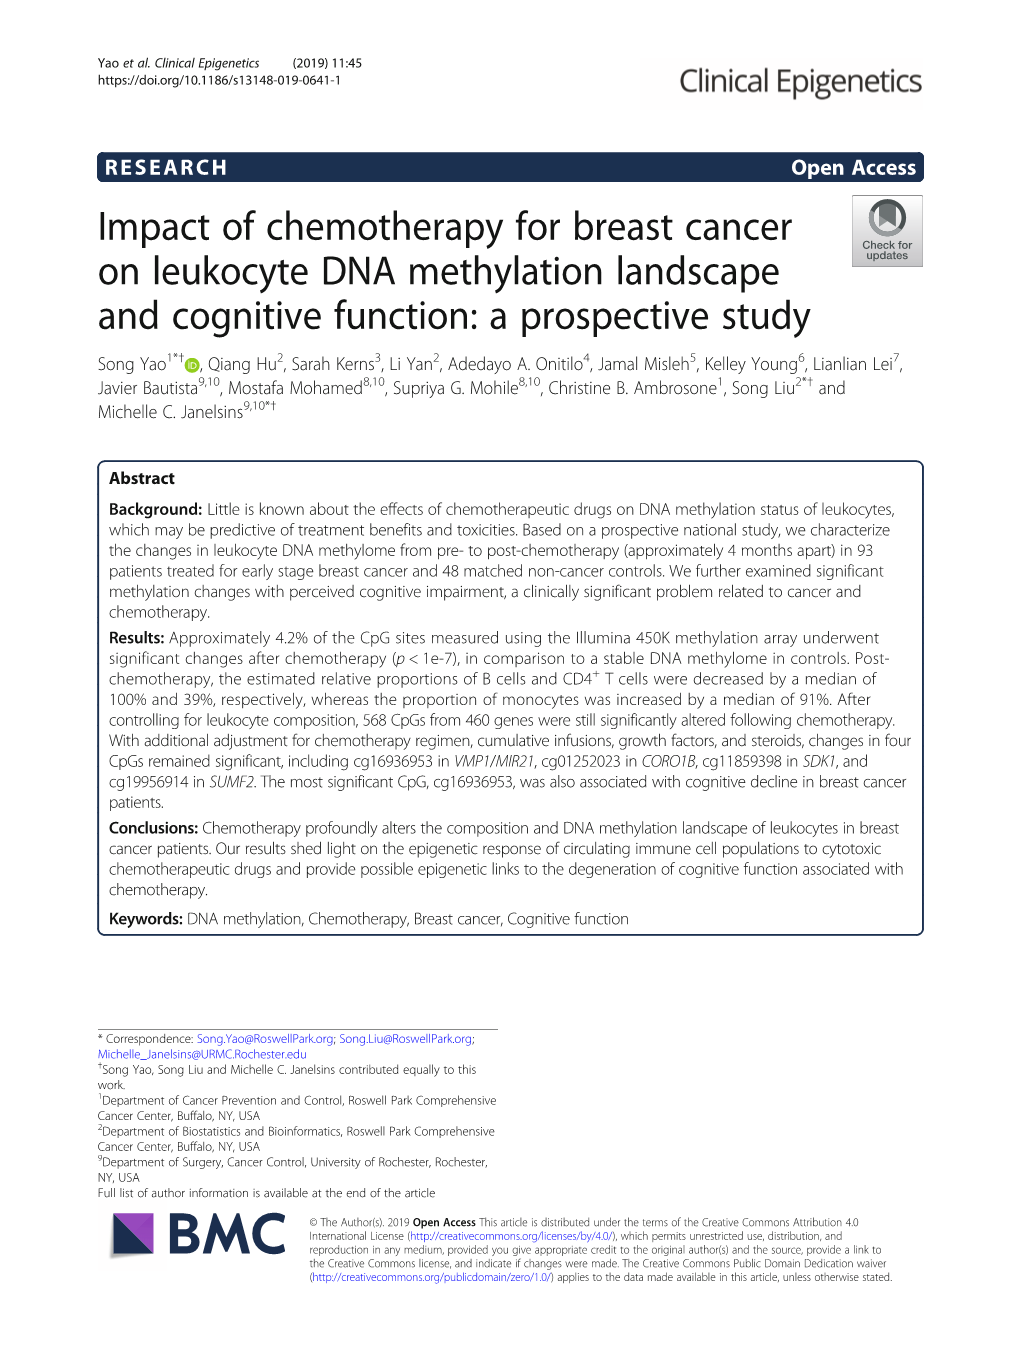 Impact of Chemotherapy for Breast Cancer on Leukocyte DNA